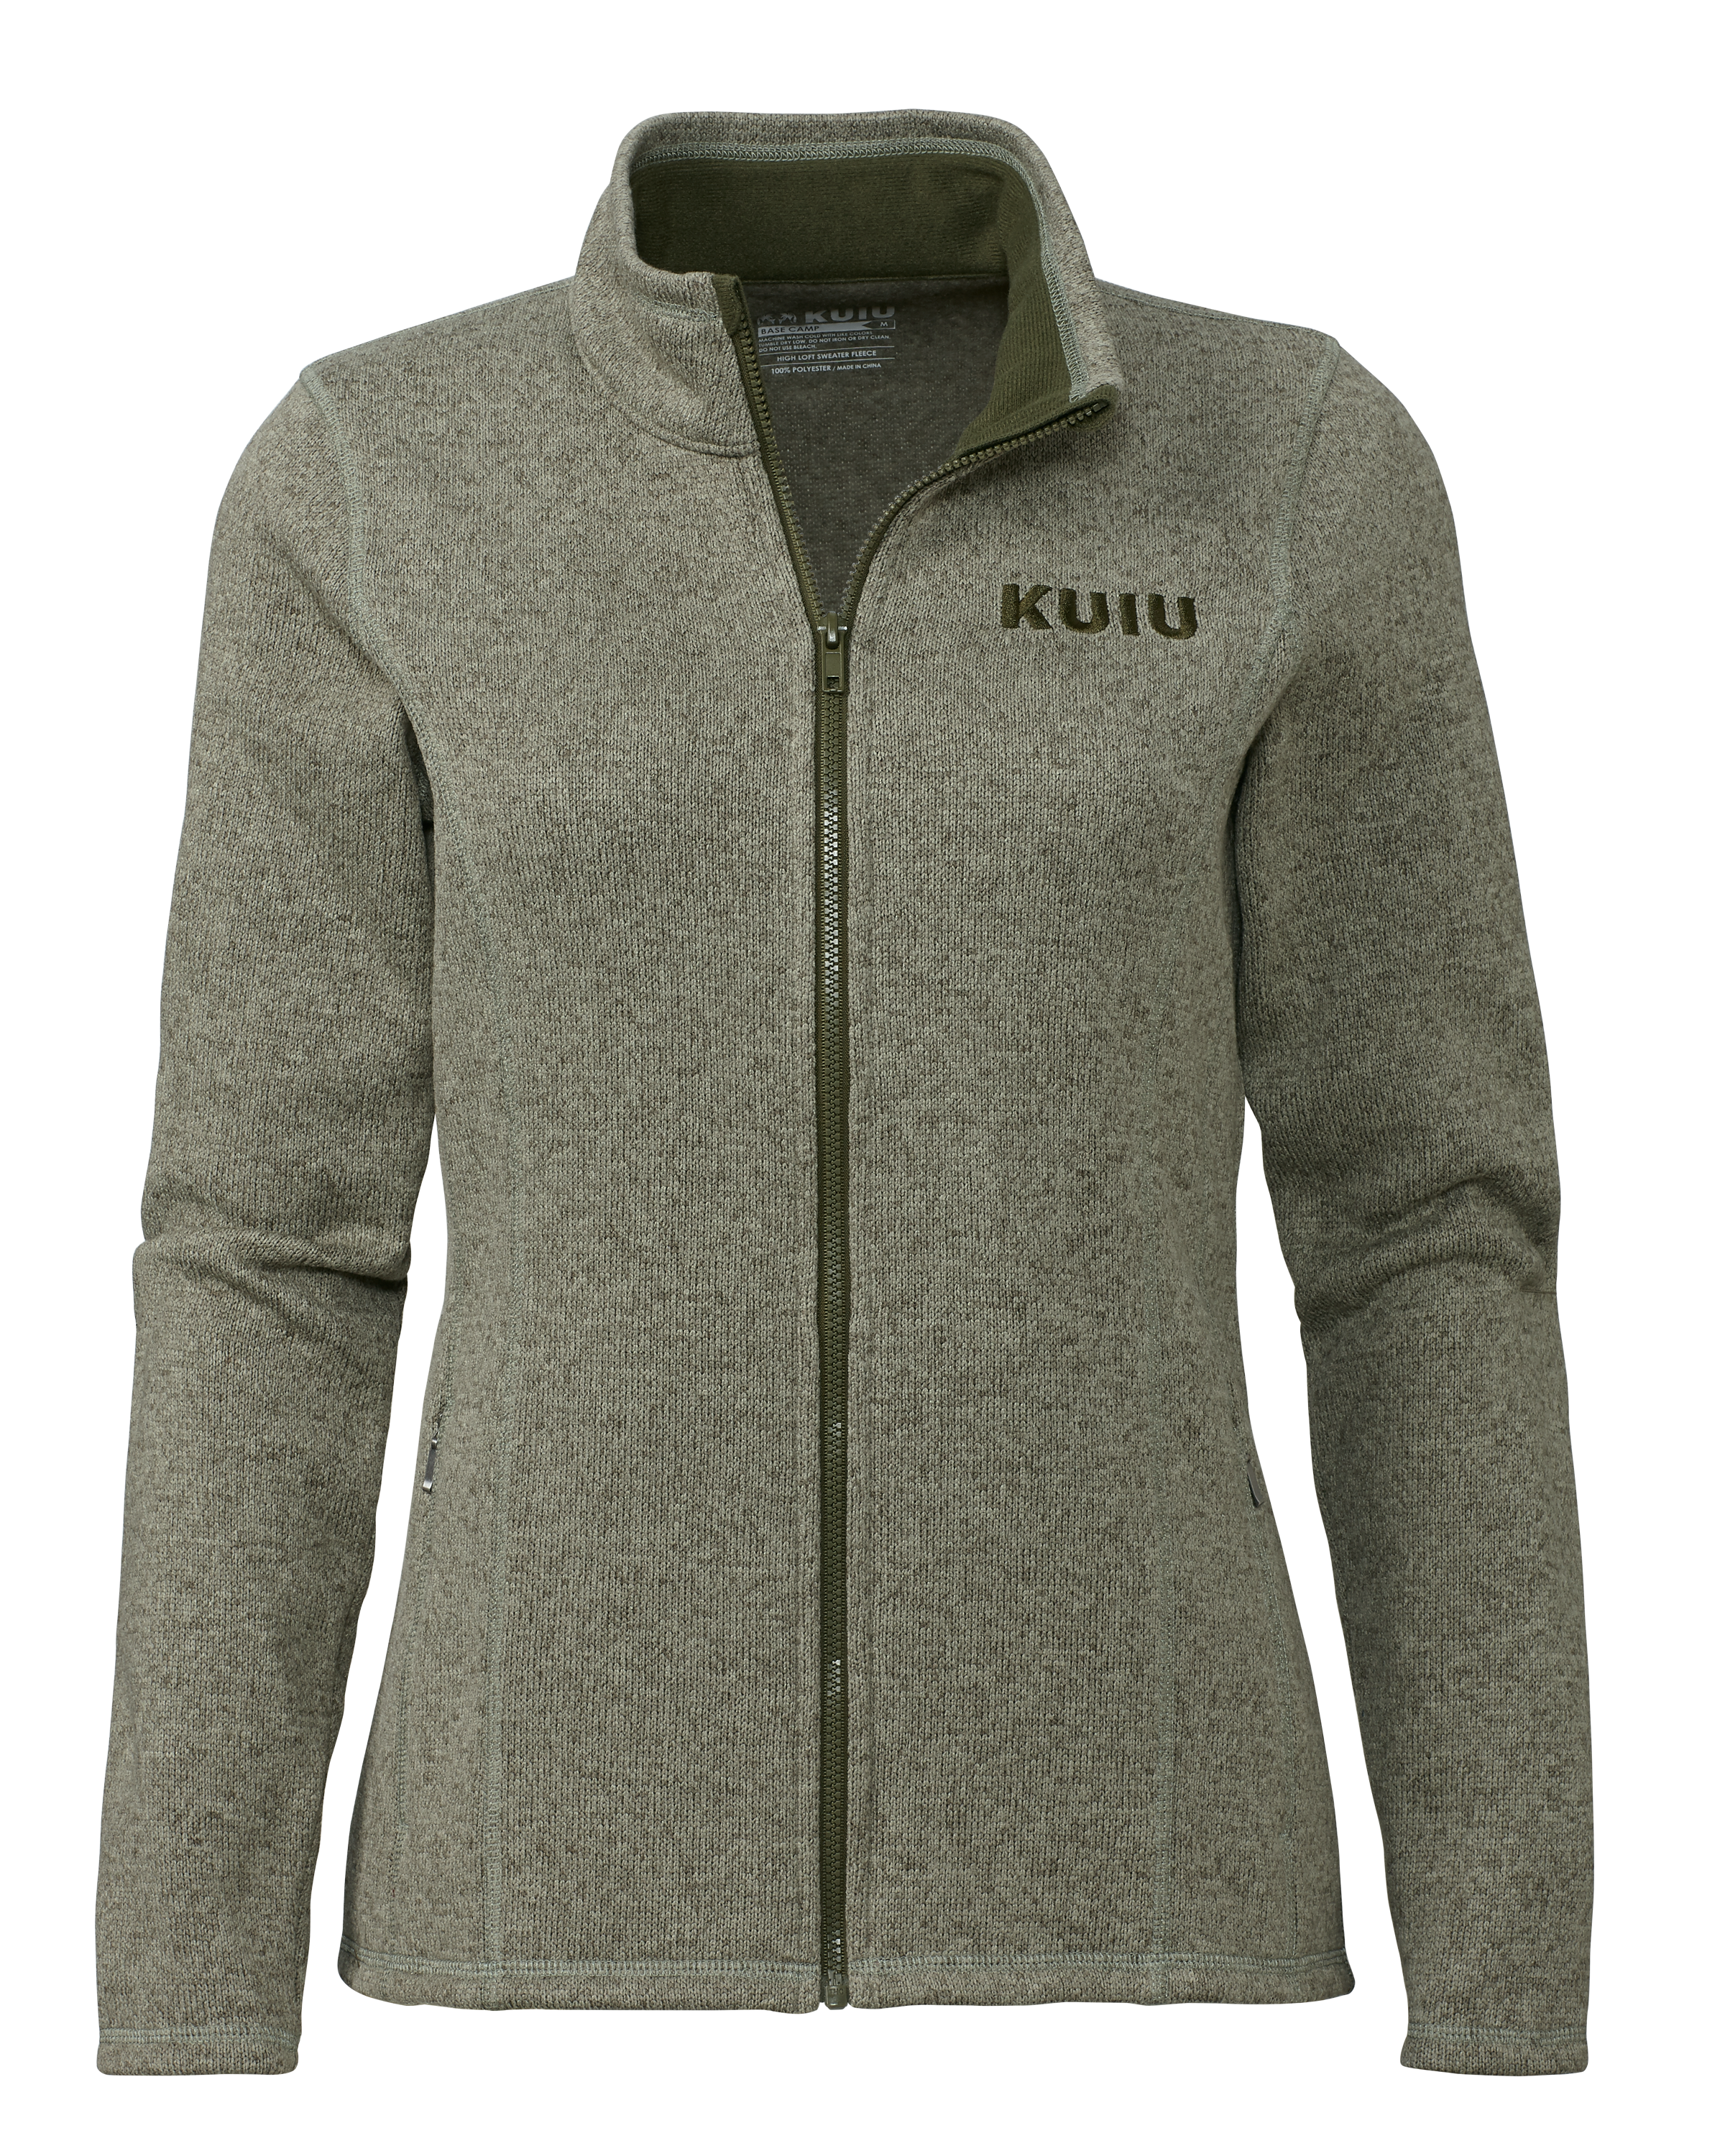 KUIU Outlet Women's Base Camp Sweater in Heather Olive | Size XL